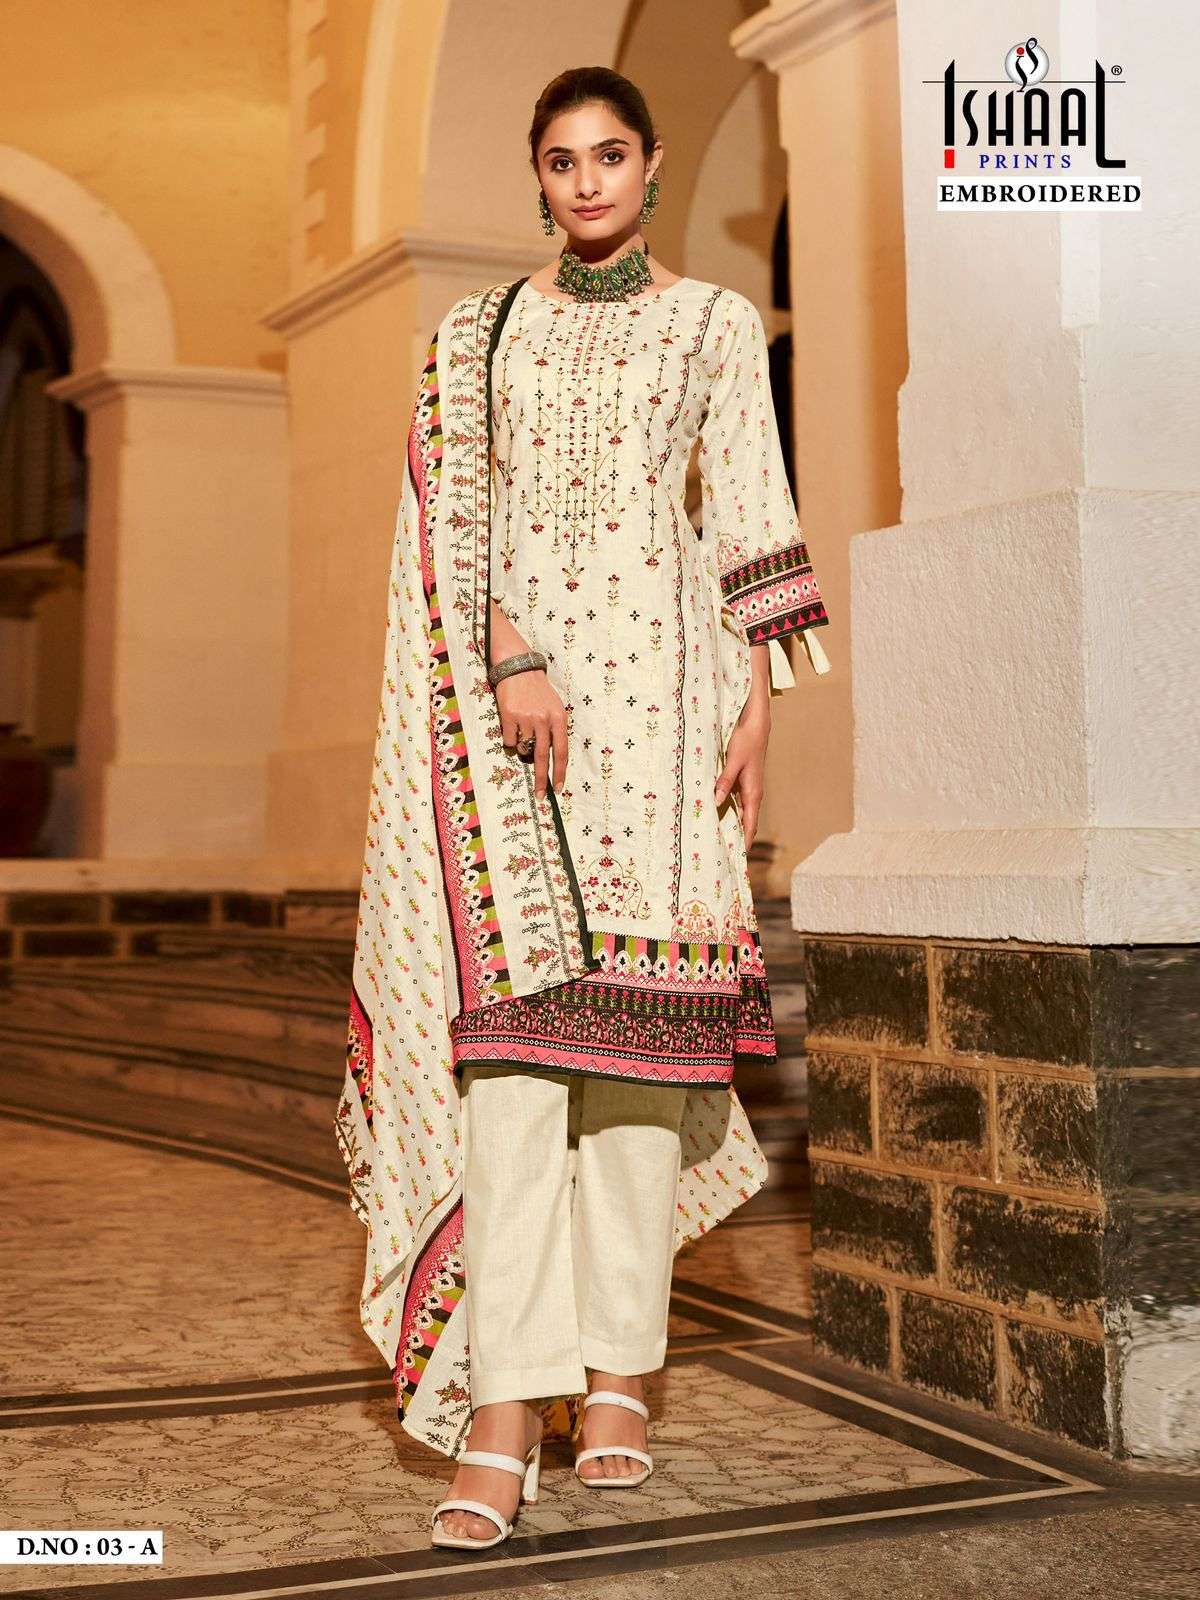 Ishaal Embroidered D 3 Colors Fancy Cotton Salwar Kameez Catalog Suppliers